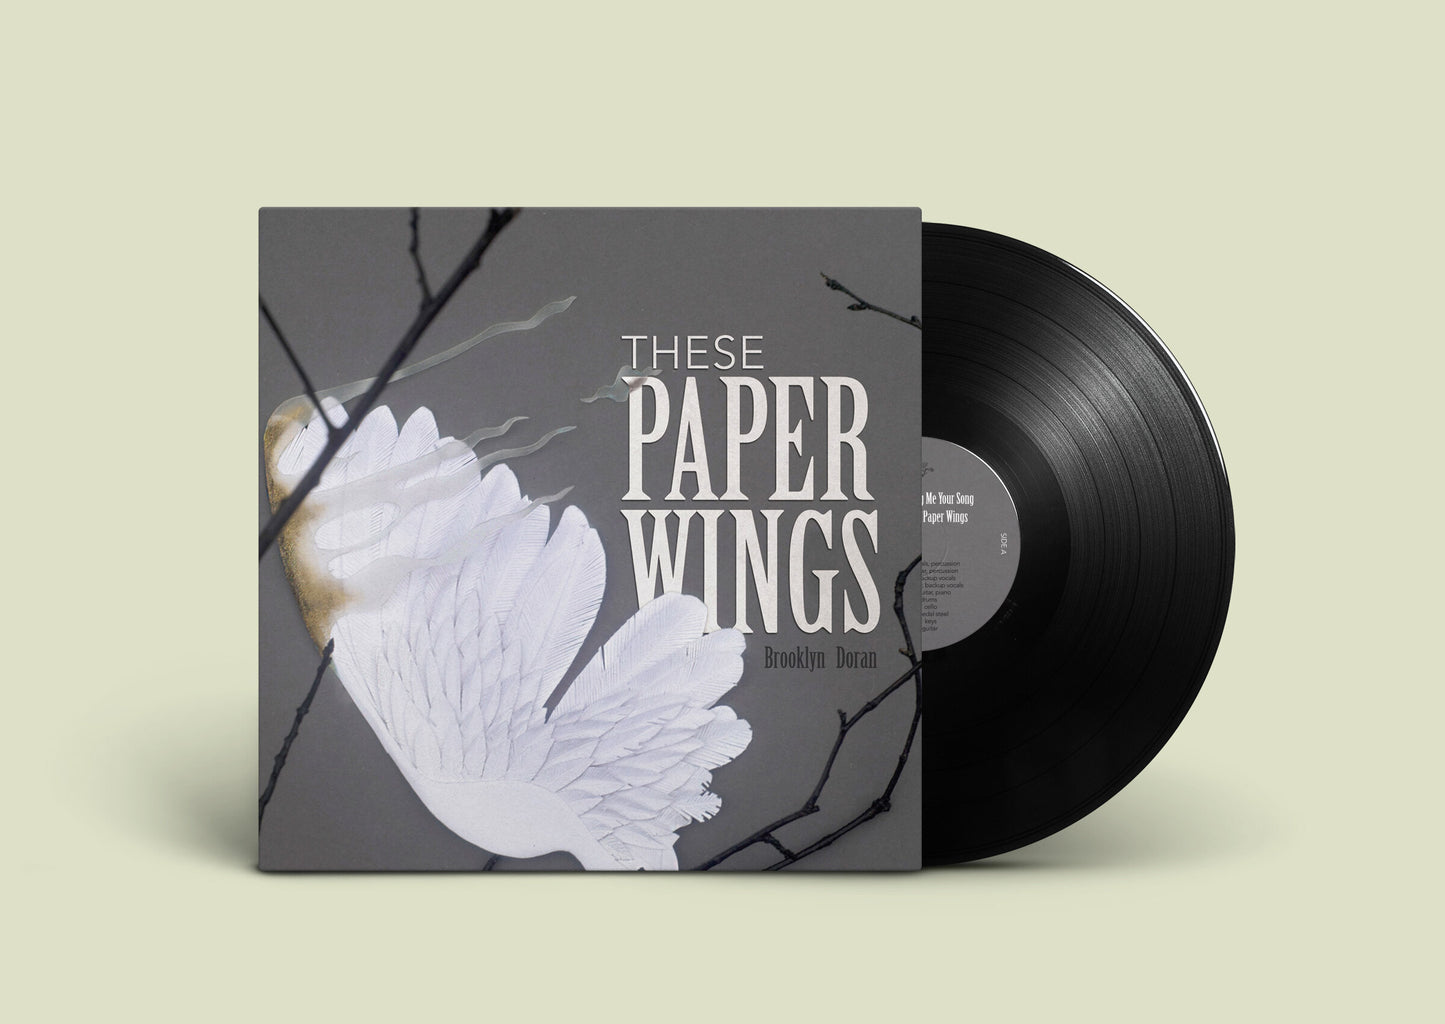 THESE PAPER WINGS